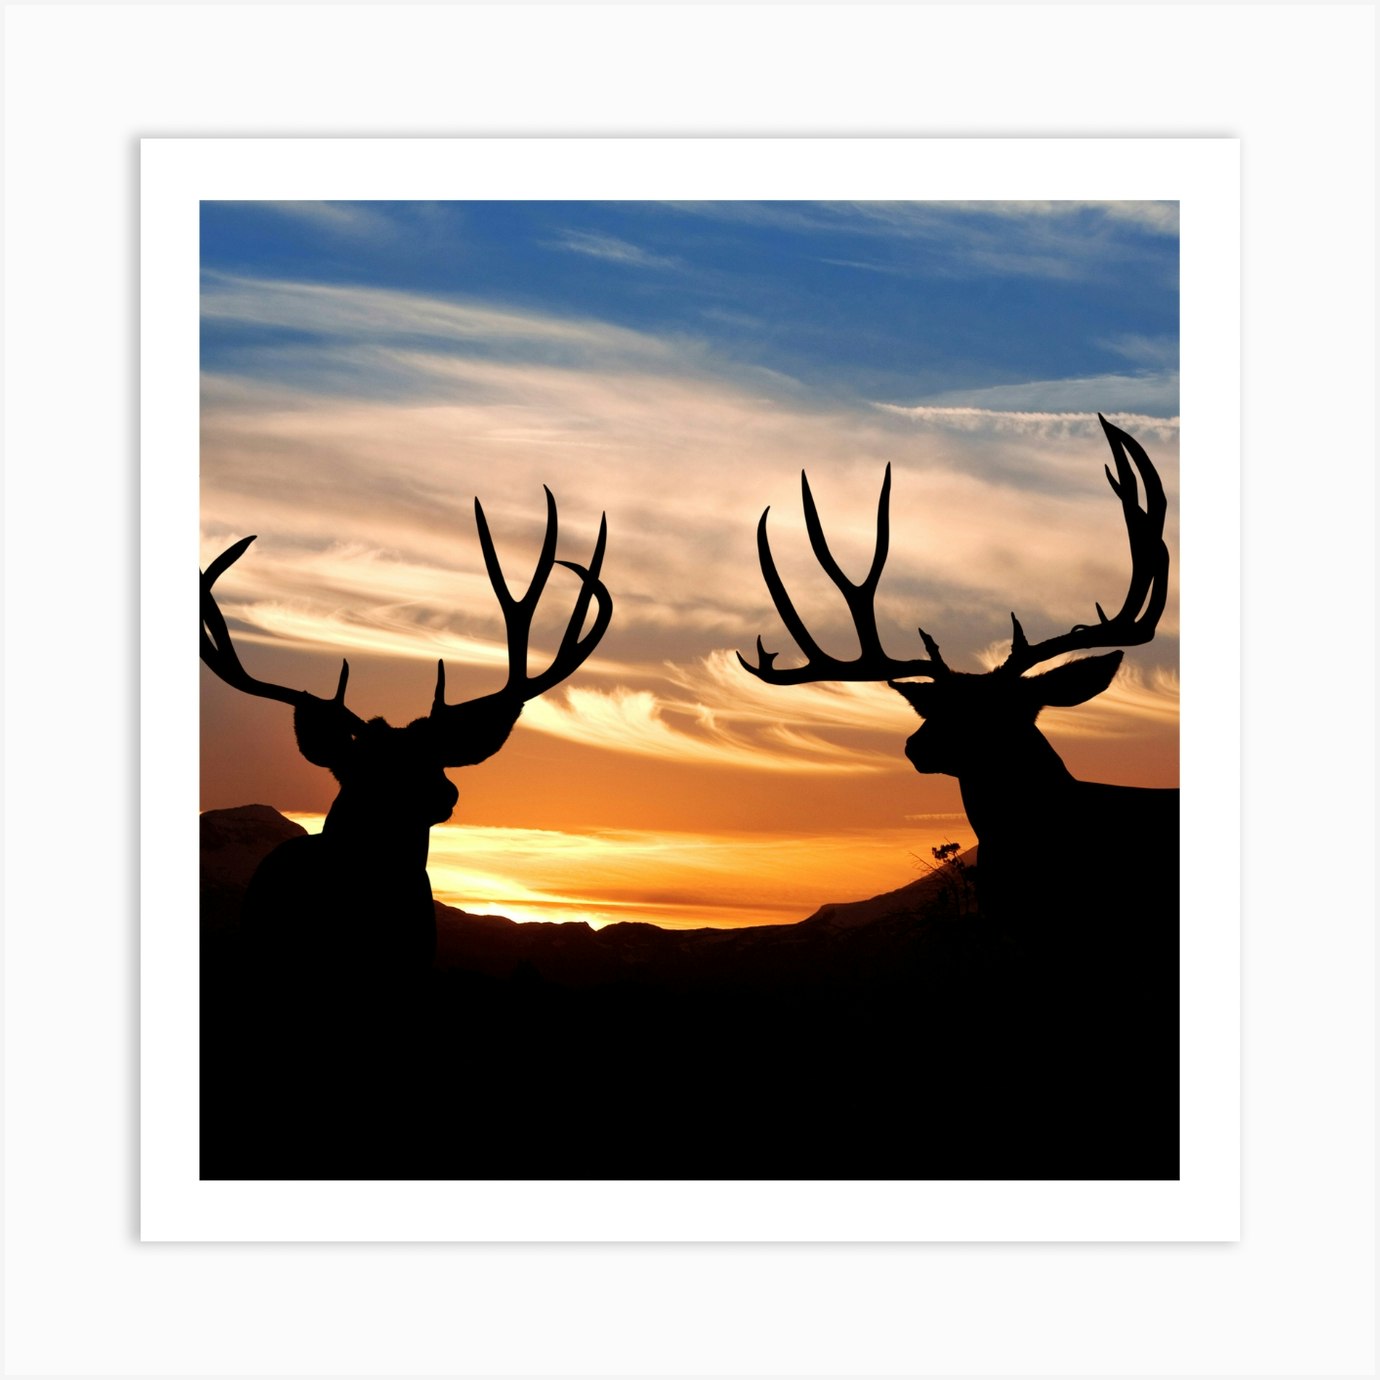 Silhouette Of Deer At Sunset Art Print by print abdo - Fy